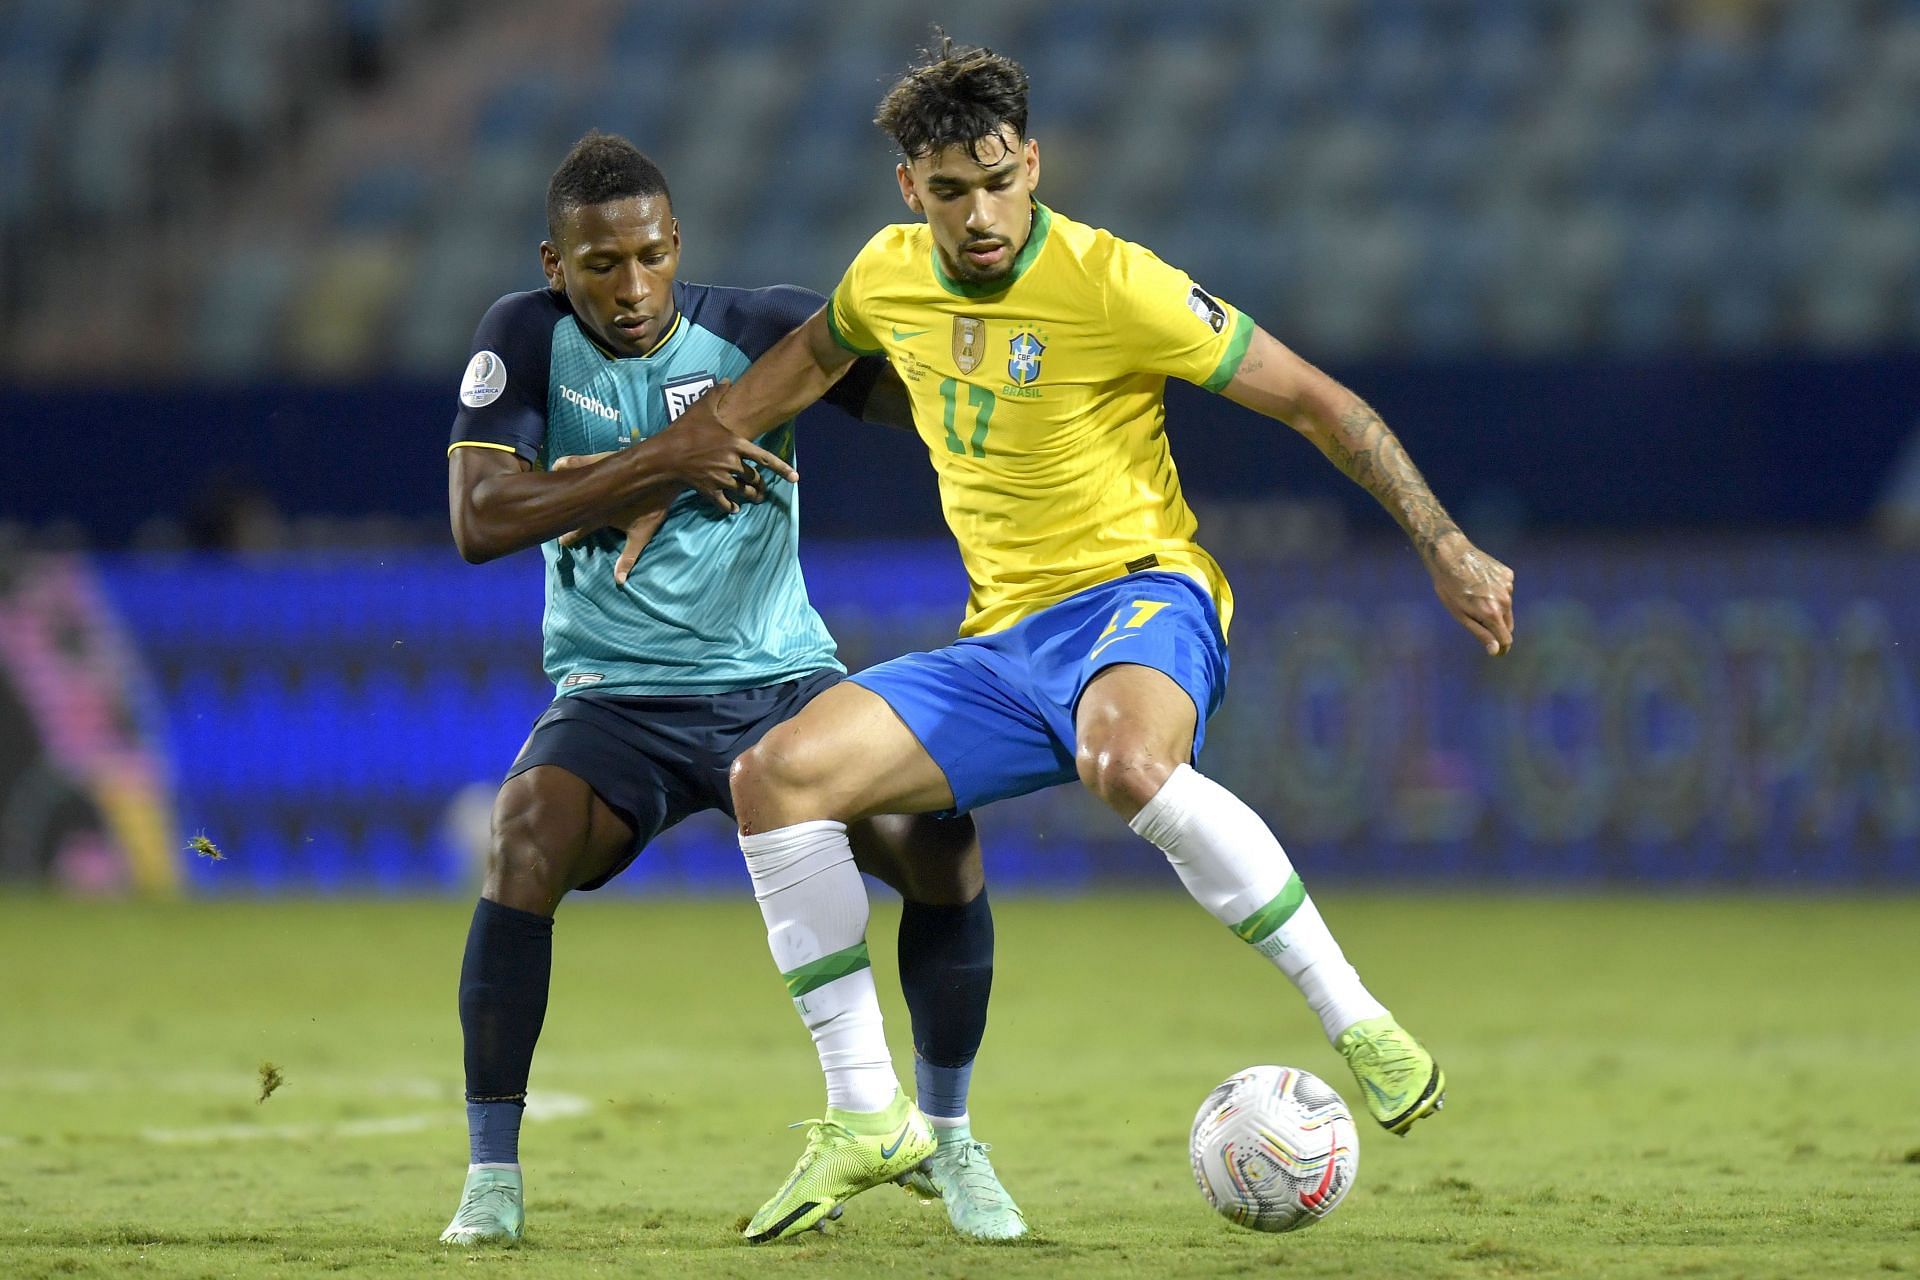 Ecuador host in-form Brazil in their upcoming 2022 FIFA World Cup qualifiers on Thursday